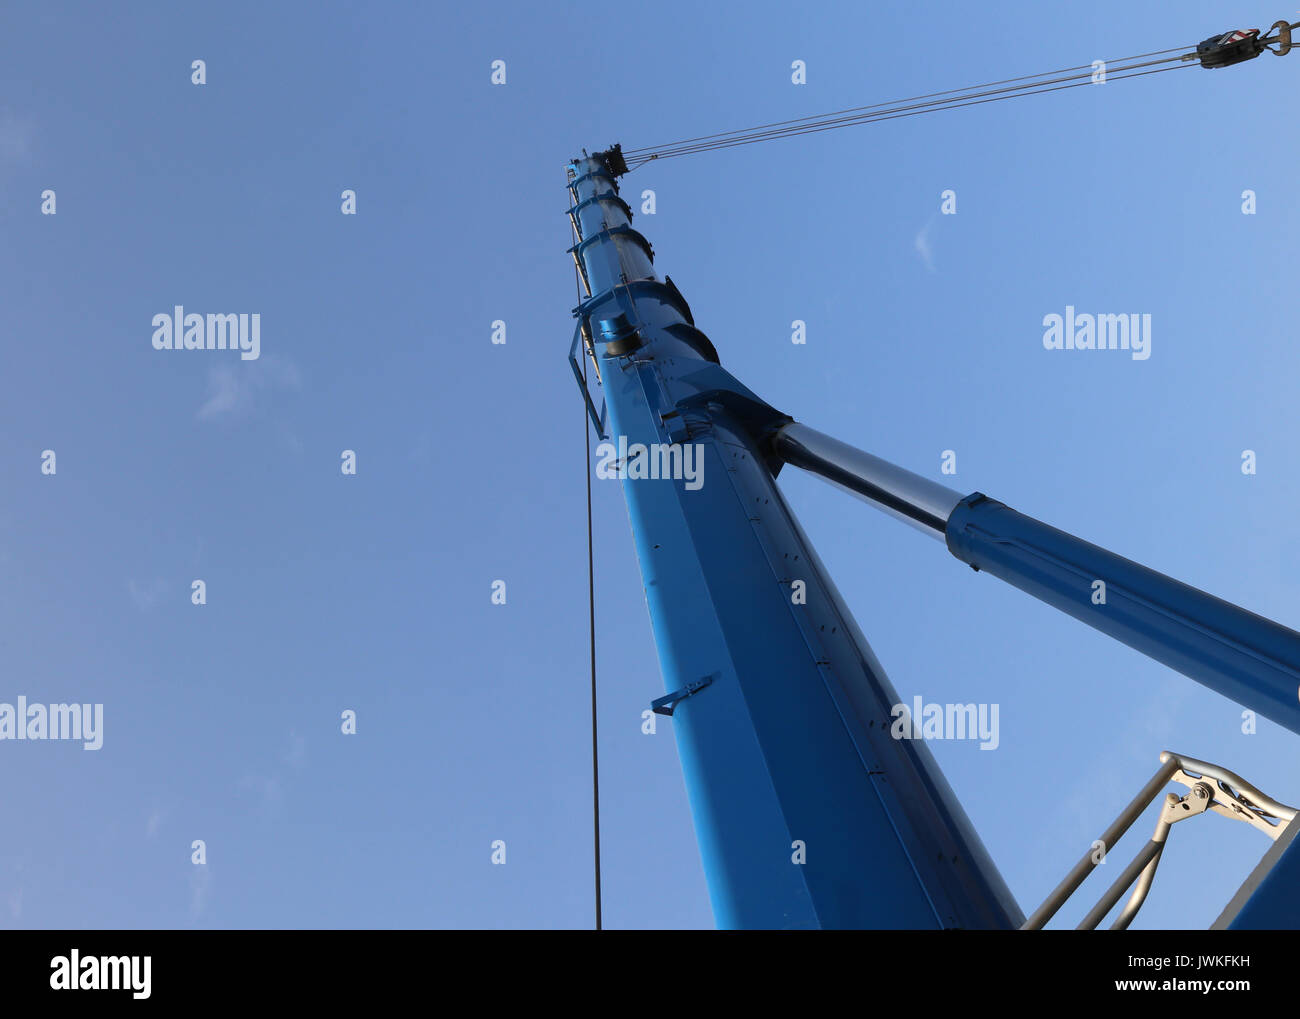 Immense hydraulic arm of a powerful crane for lifting heavy loads at an industrial site Stock Photo